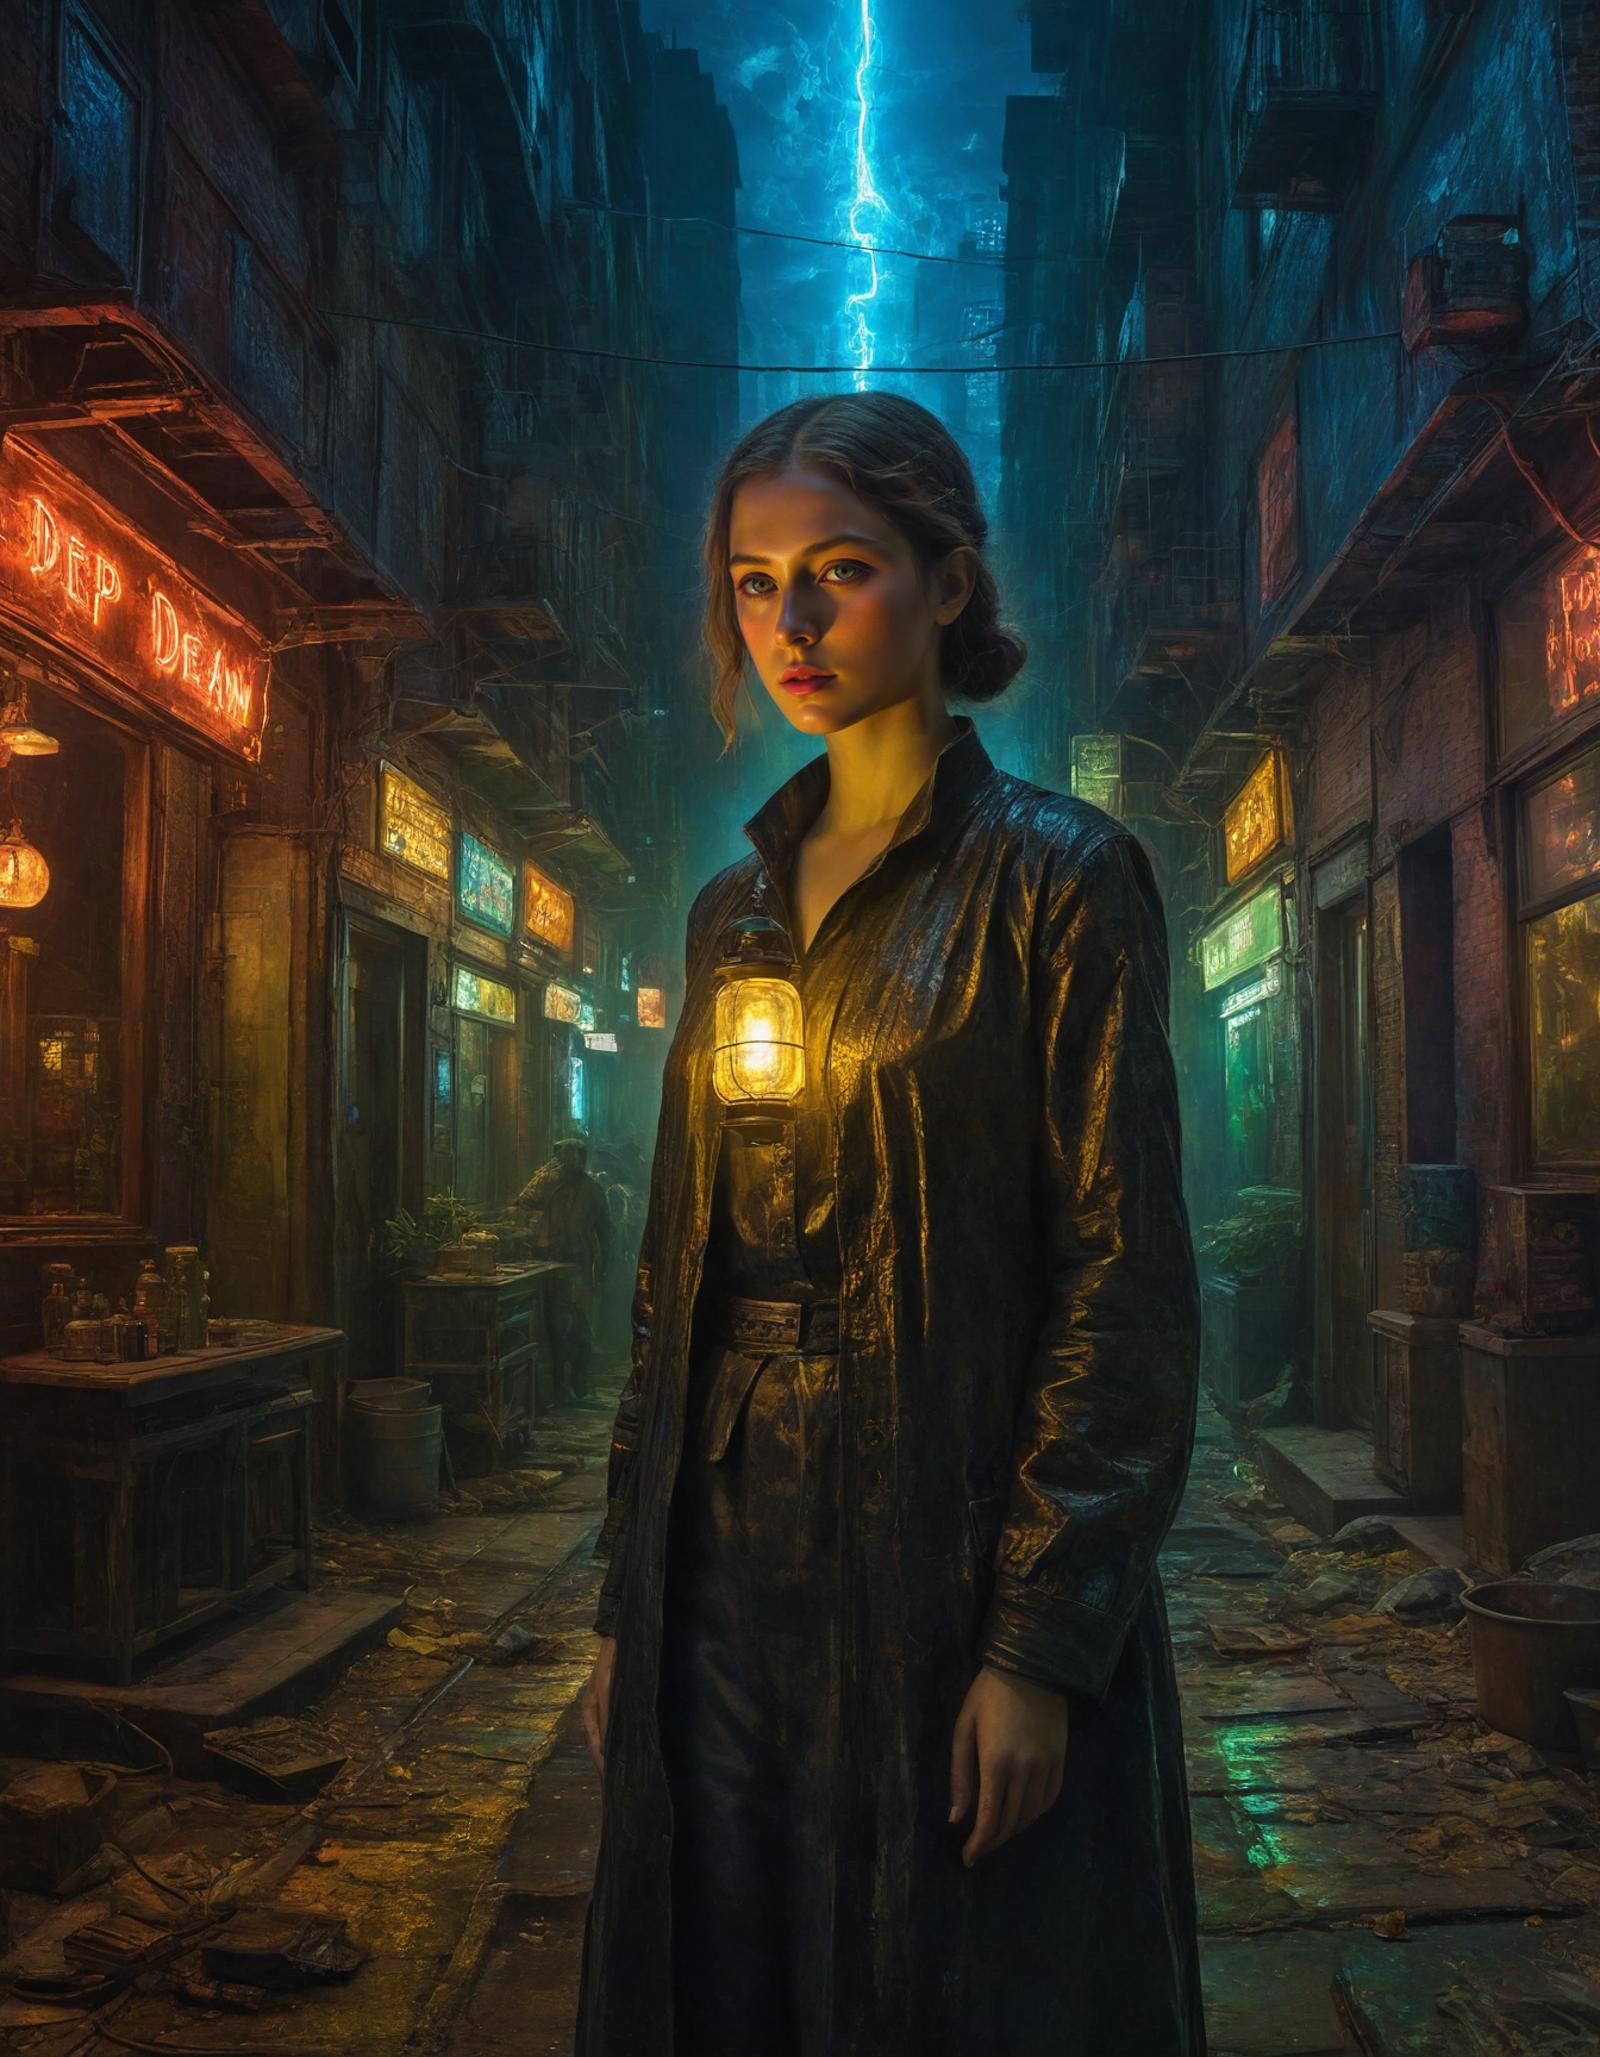 A woman in a black jacket and a glowing light on her chest stands in an alleyway.